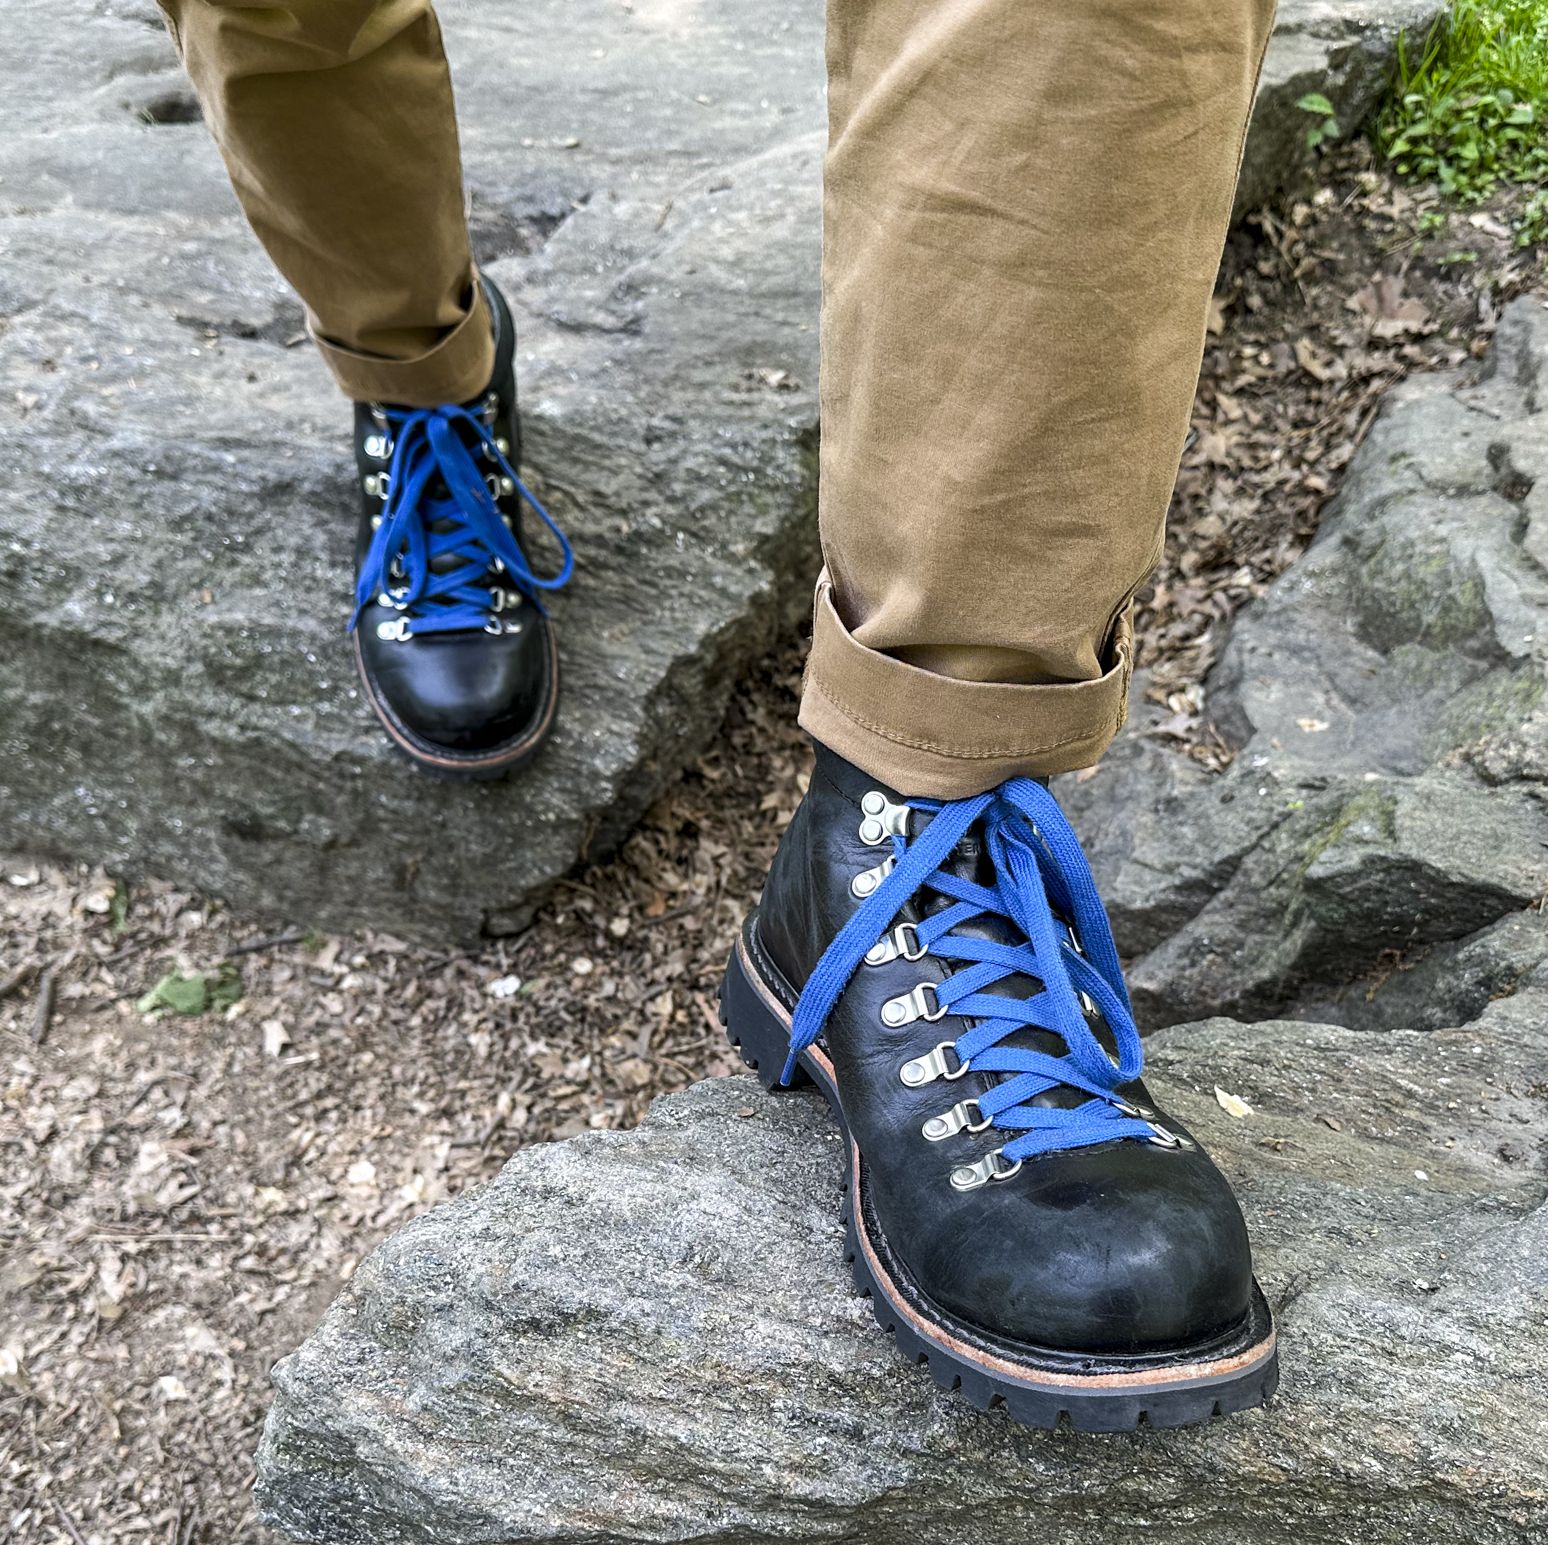 Rack Up Your Step Count Outdoors with These Hiking Boots